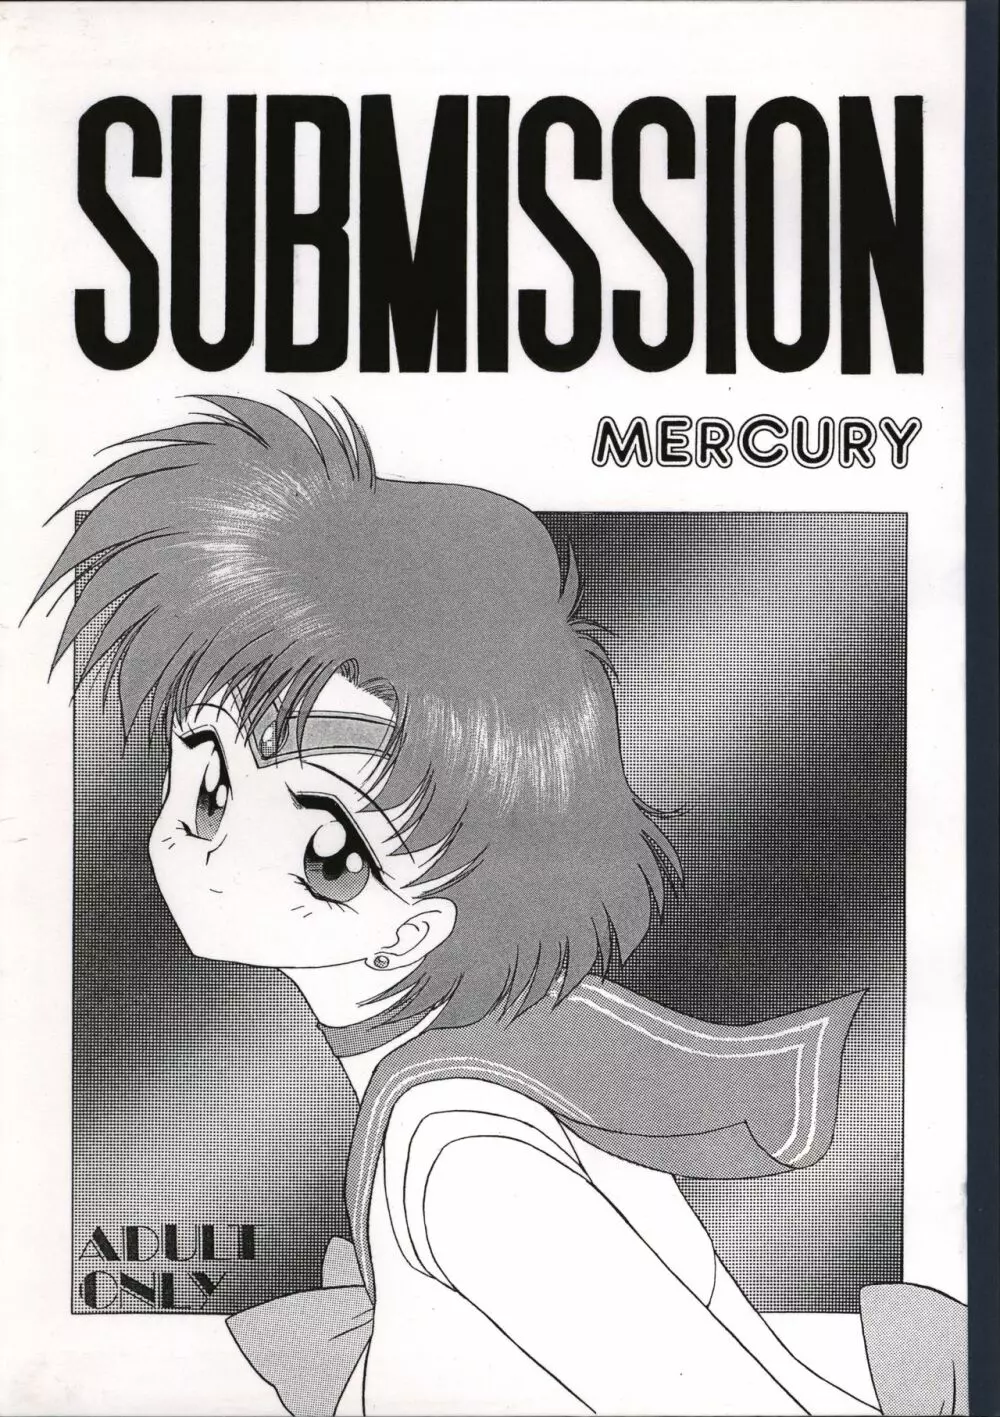 SUBMISSION MERCURY - page1